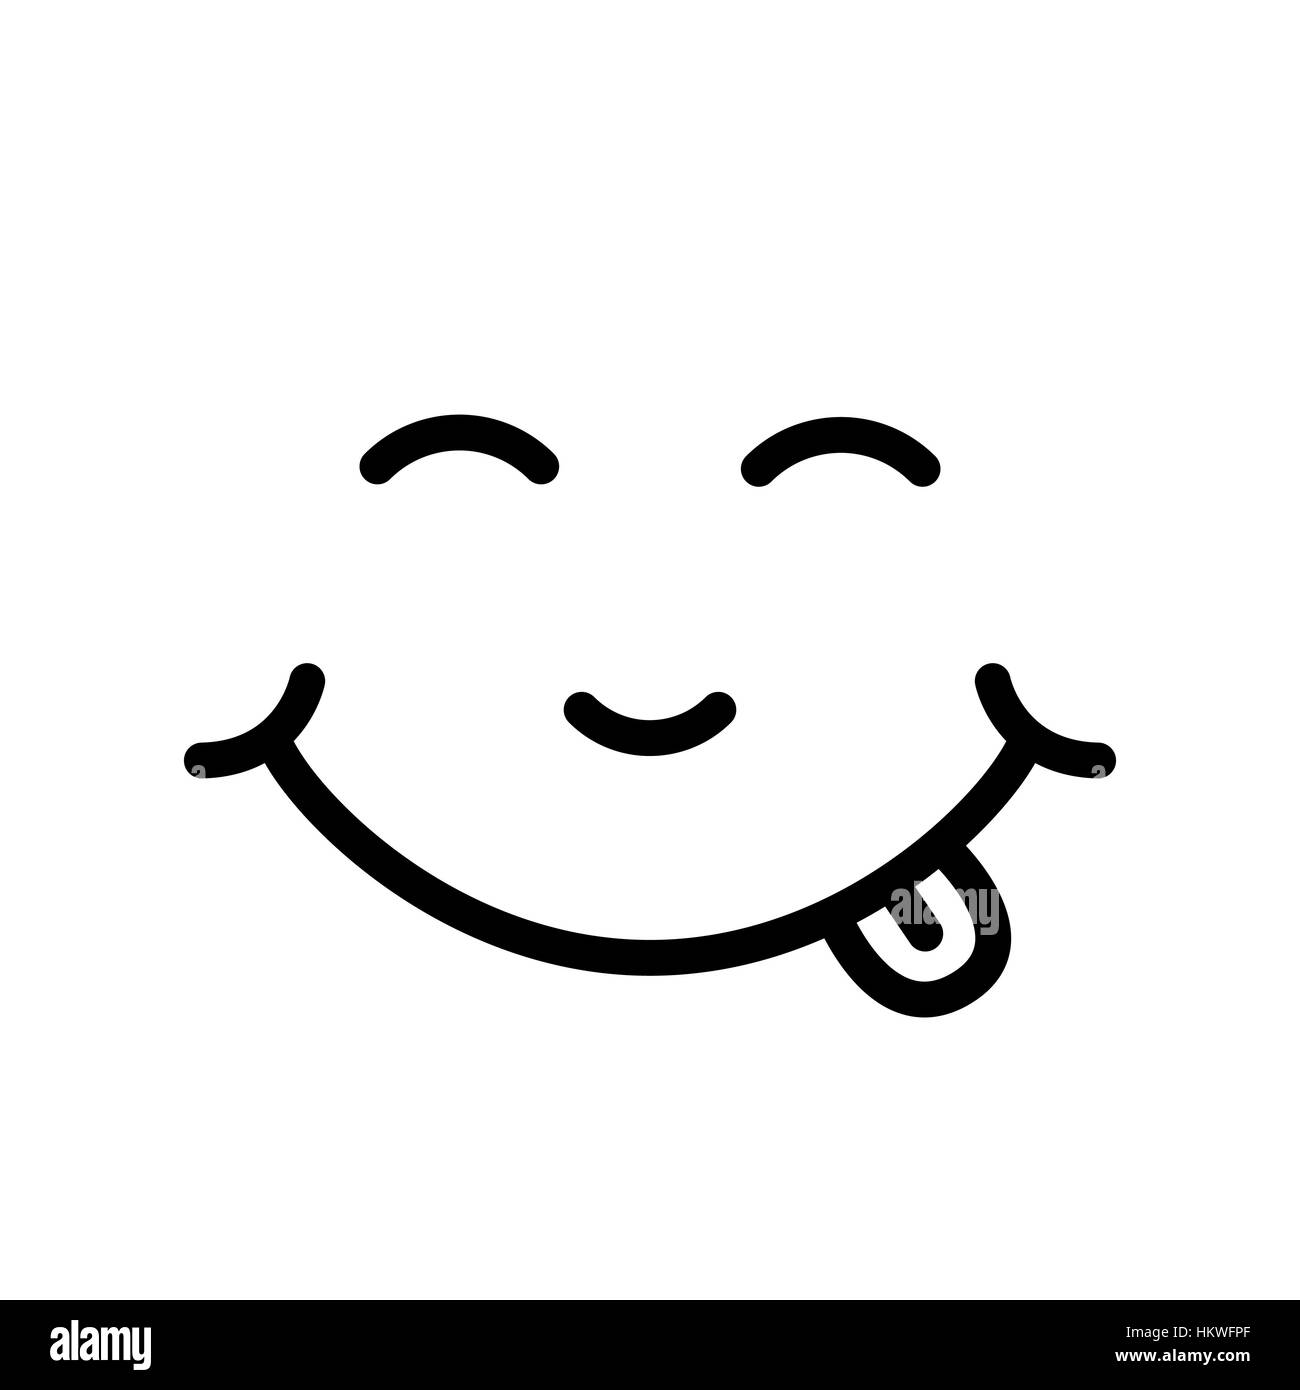 Smiley face icon Black and White Stock Photos & Images - Alamy